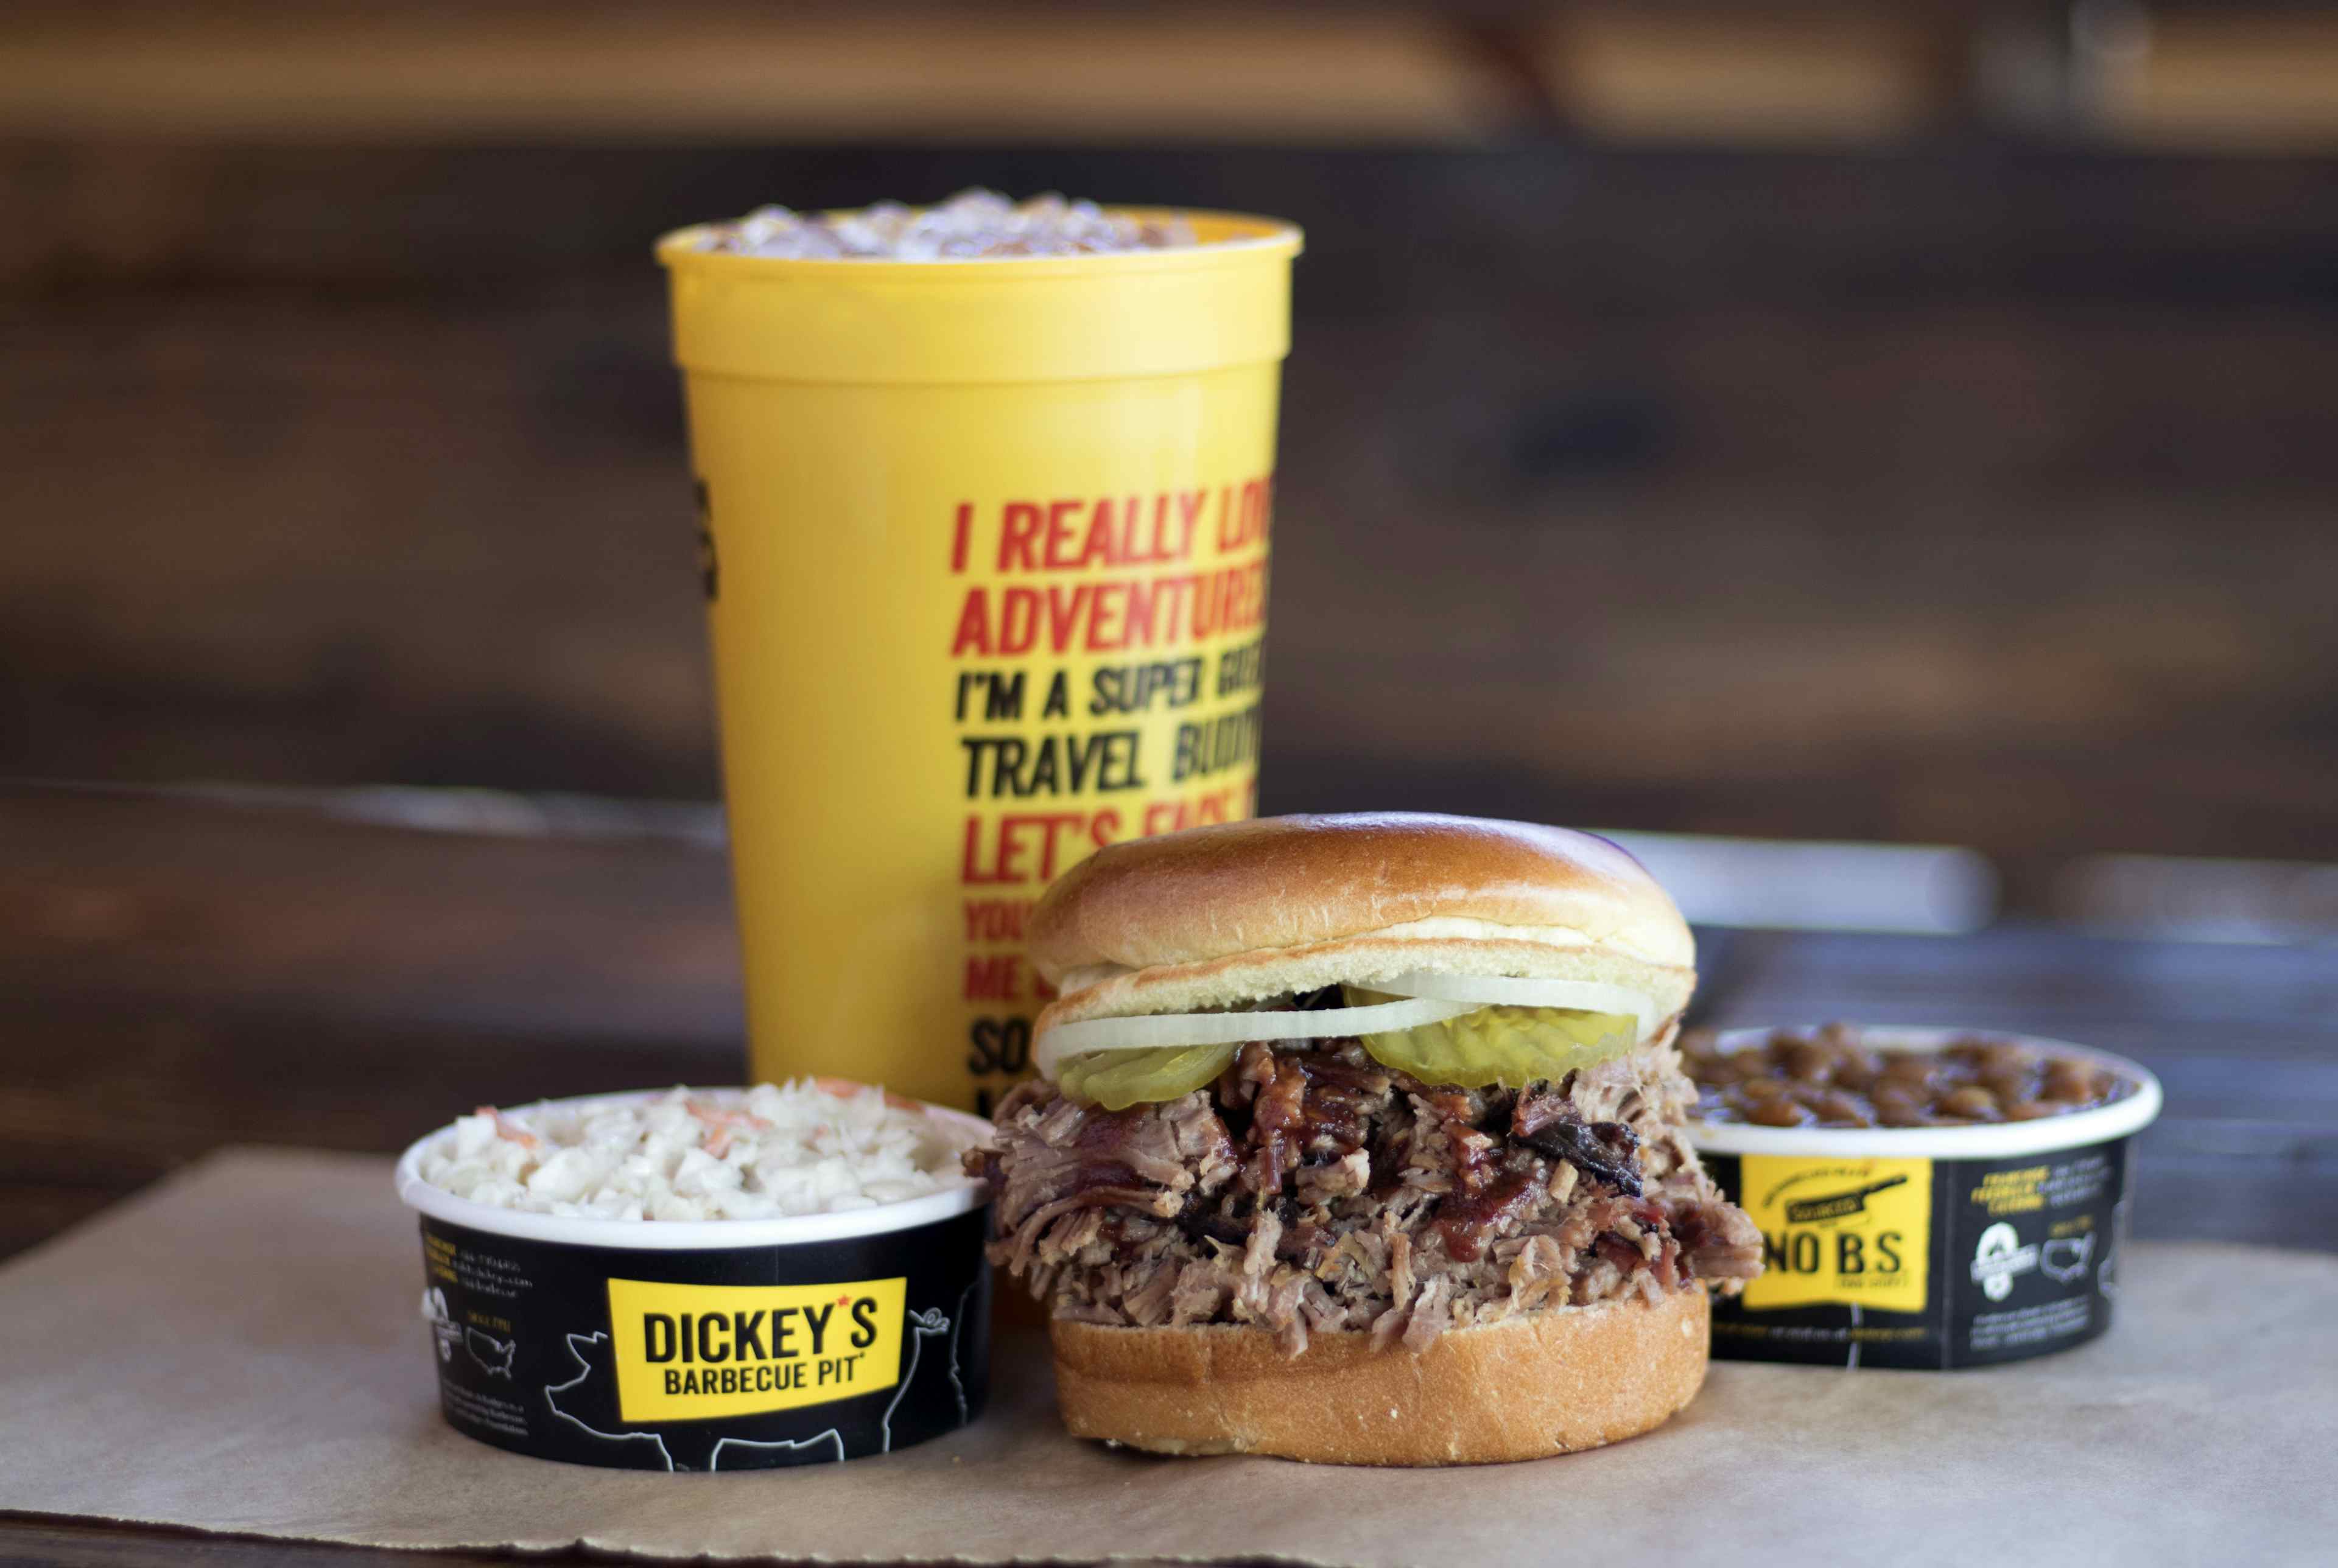 All About Ann Arbor: Dickey's Barbecue Pit opening in Ann Arbor Oct. 26